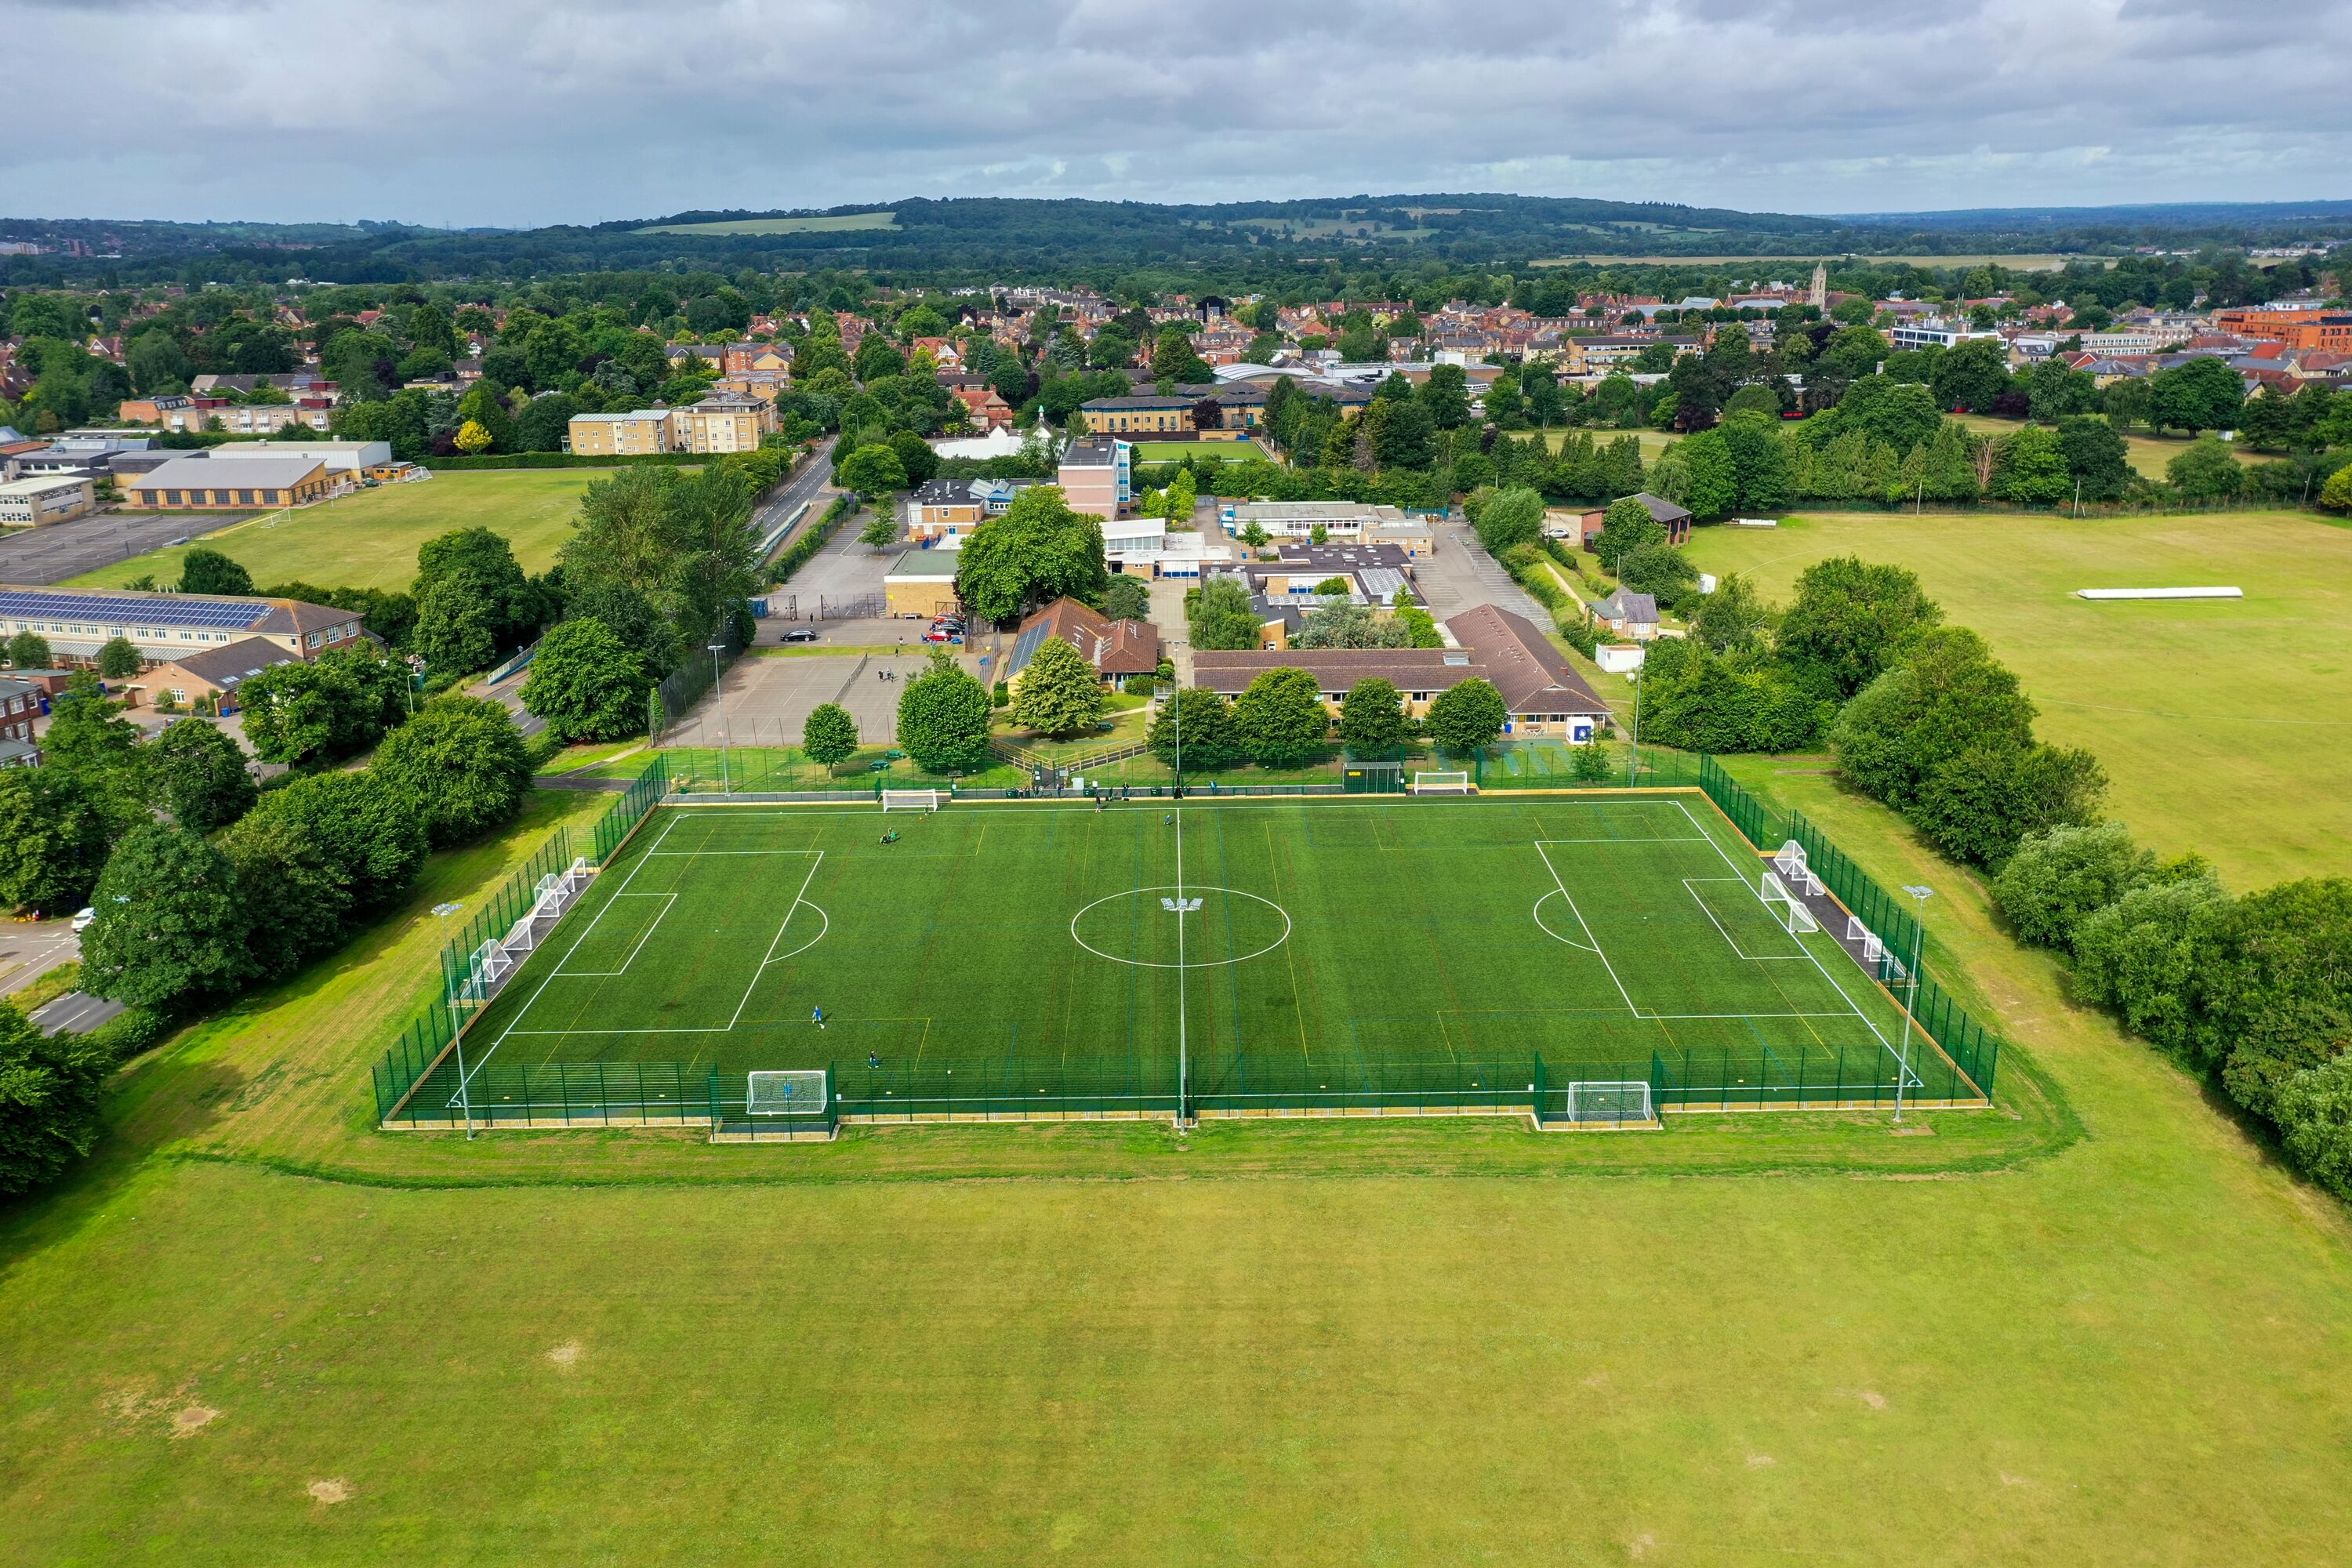 North Site 3G Pitch